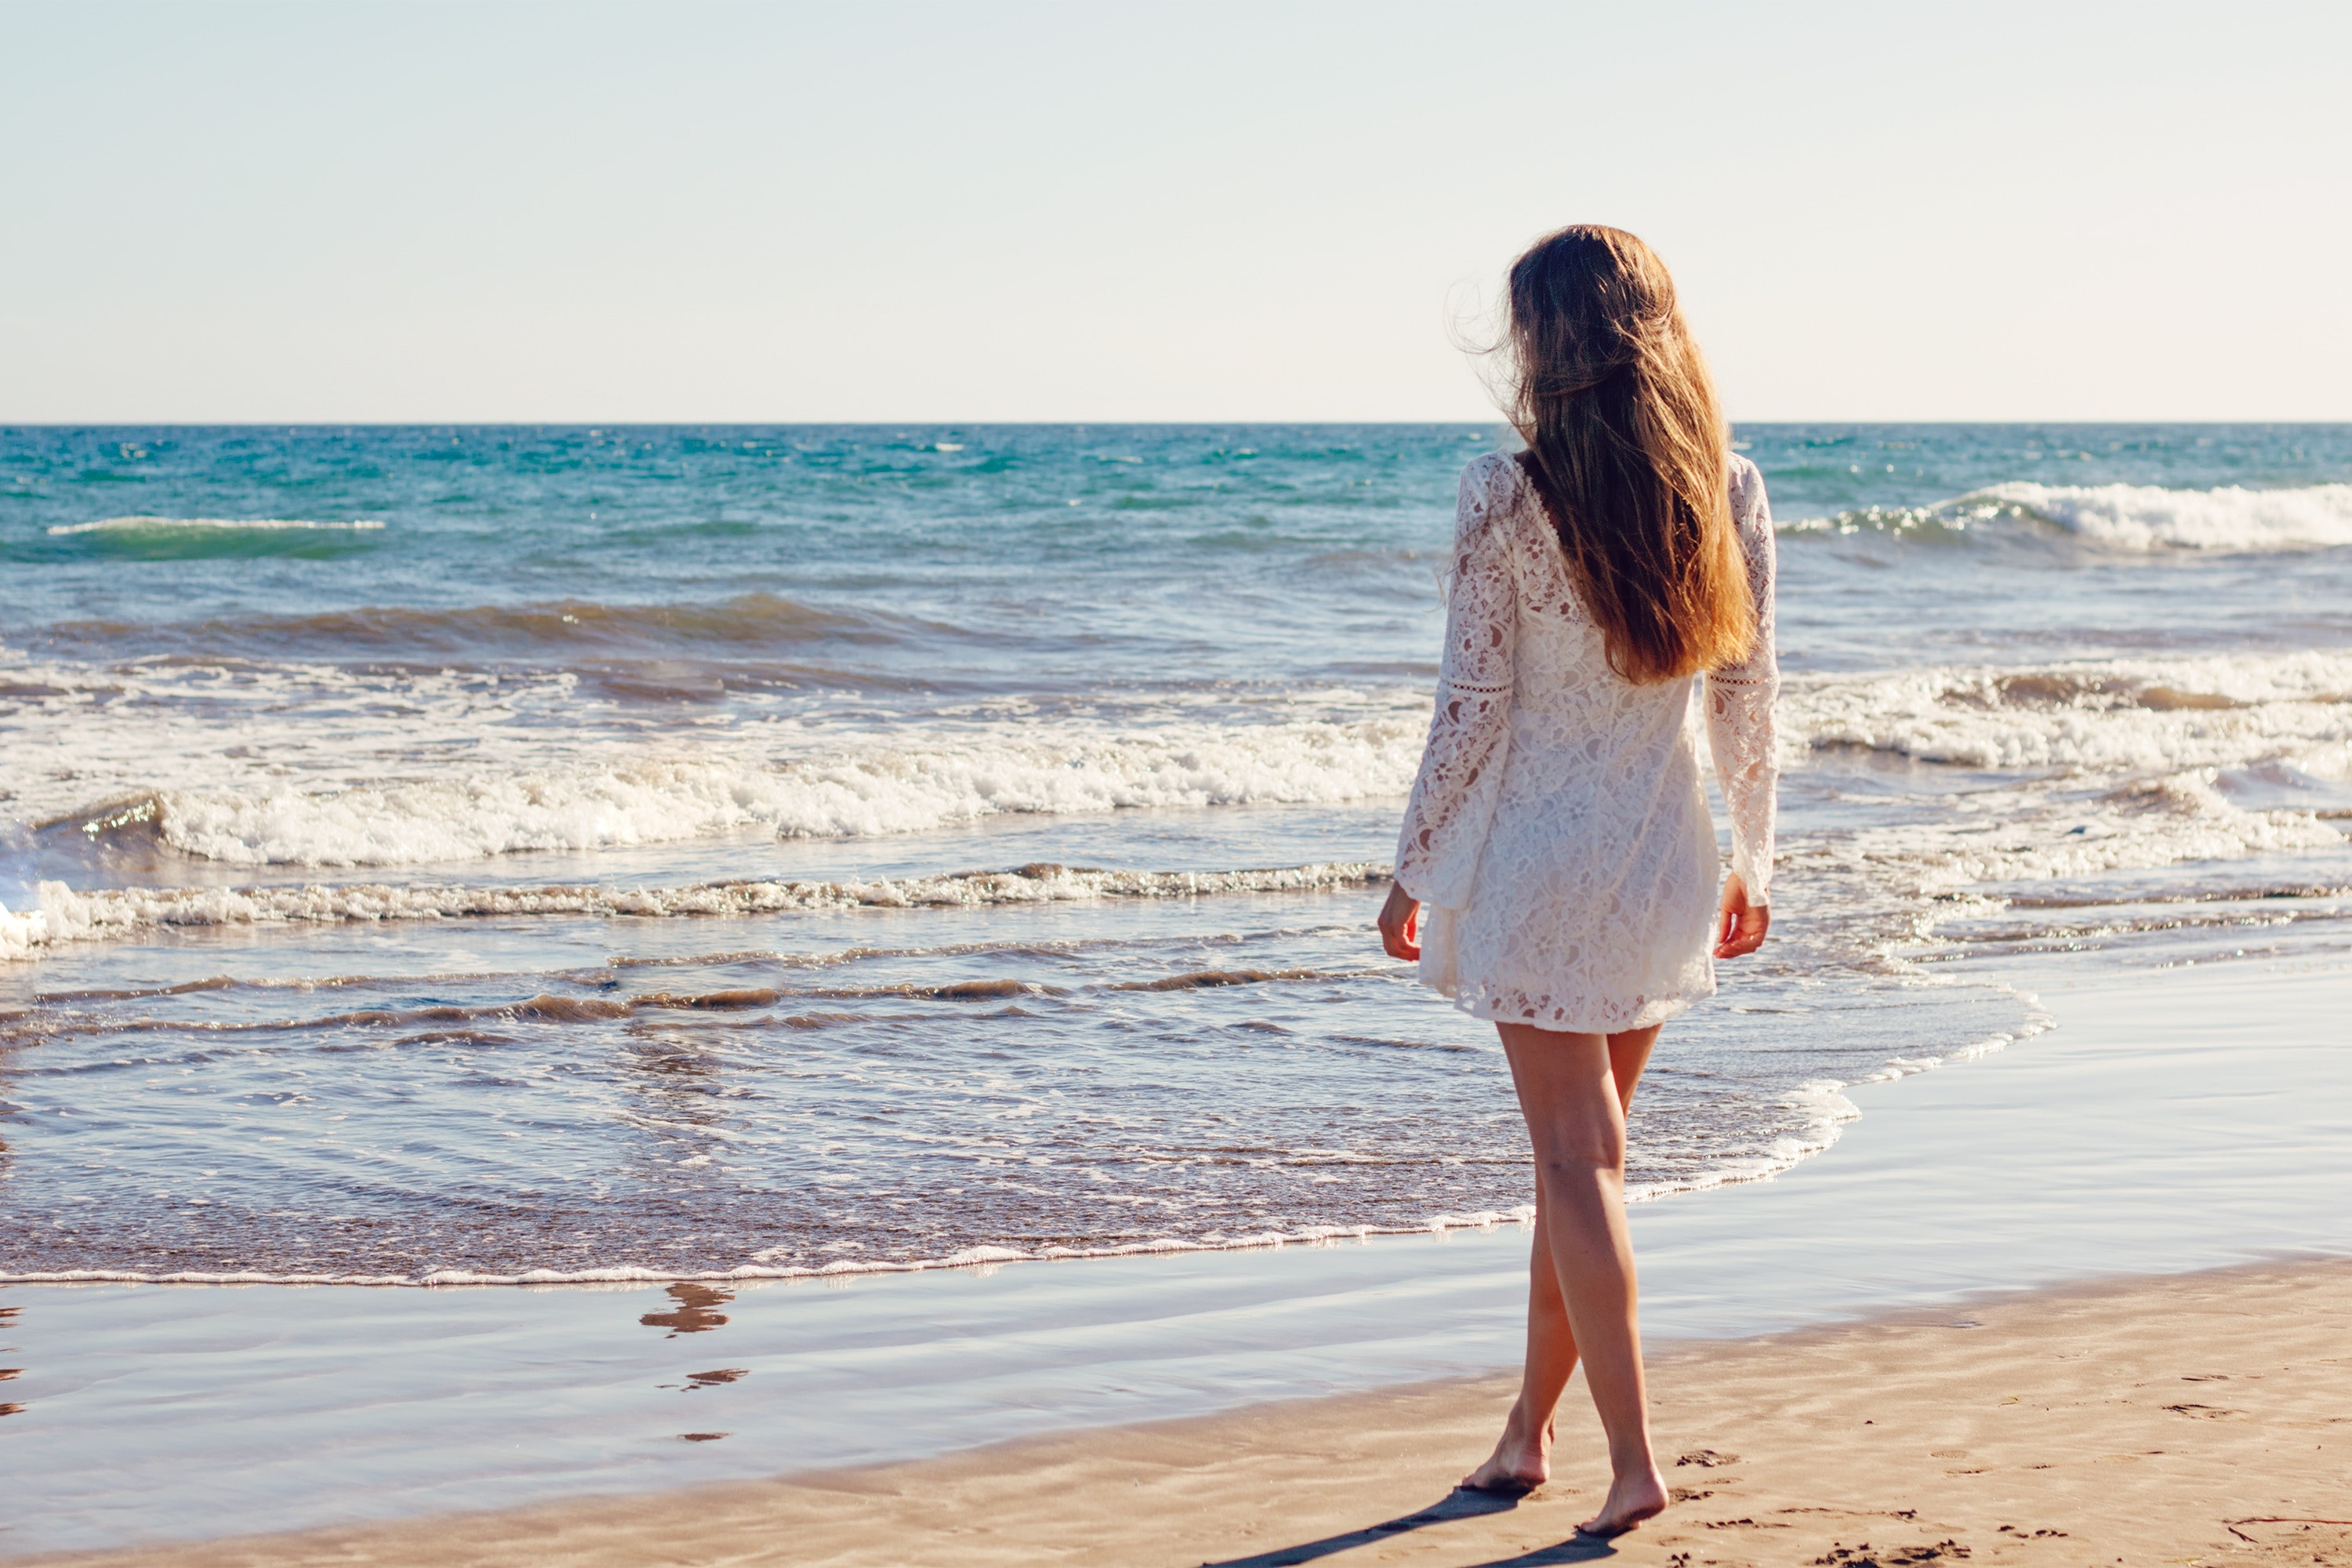 Woman in White Lace Long Sleeves Dress on Seashore, Beach, Relaxation, White dress, Waves, HQ Photo